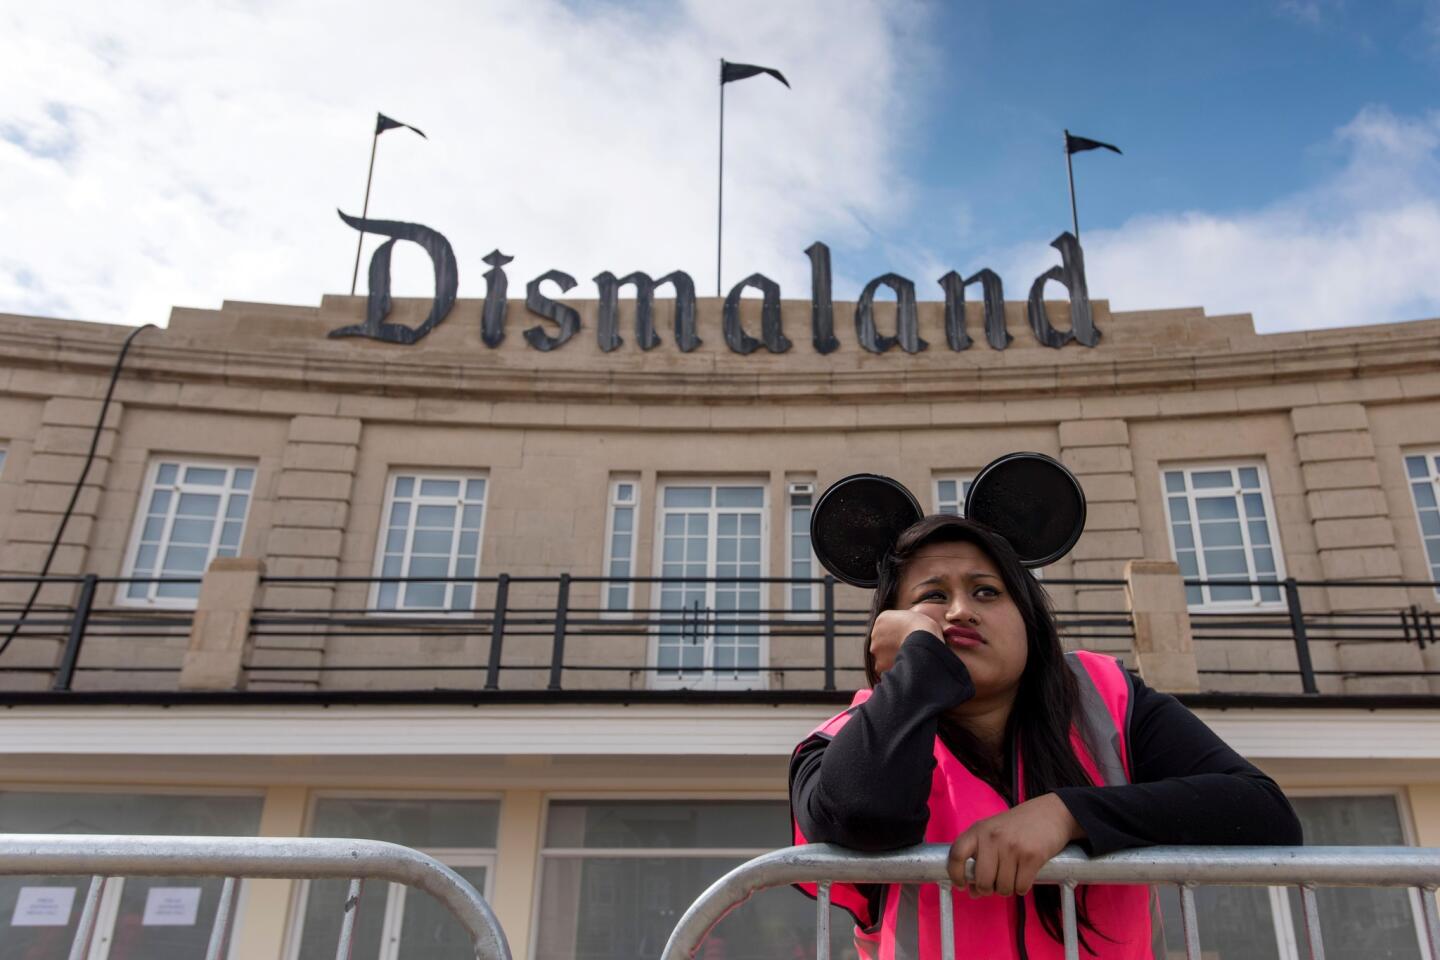 Outside Banksy's Dismaland in Western-super-Mare, Somerset, England.